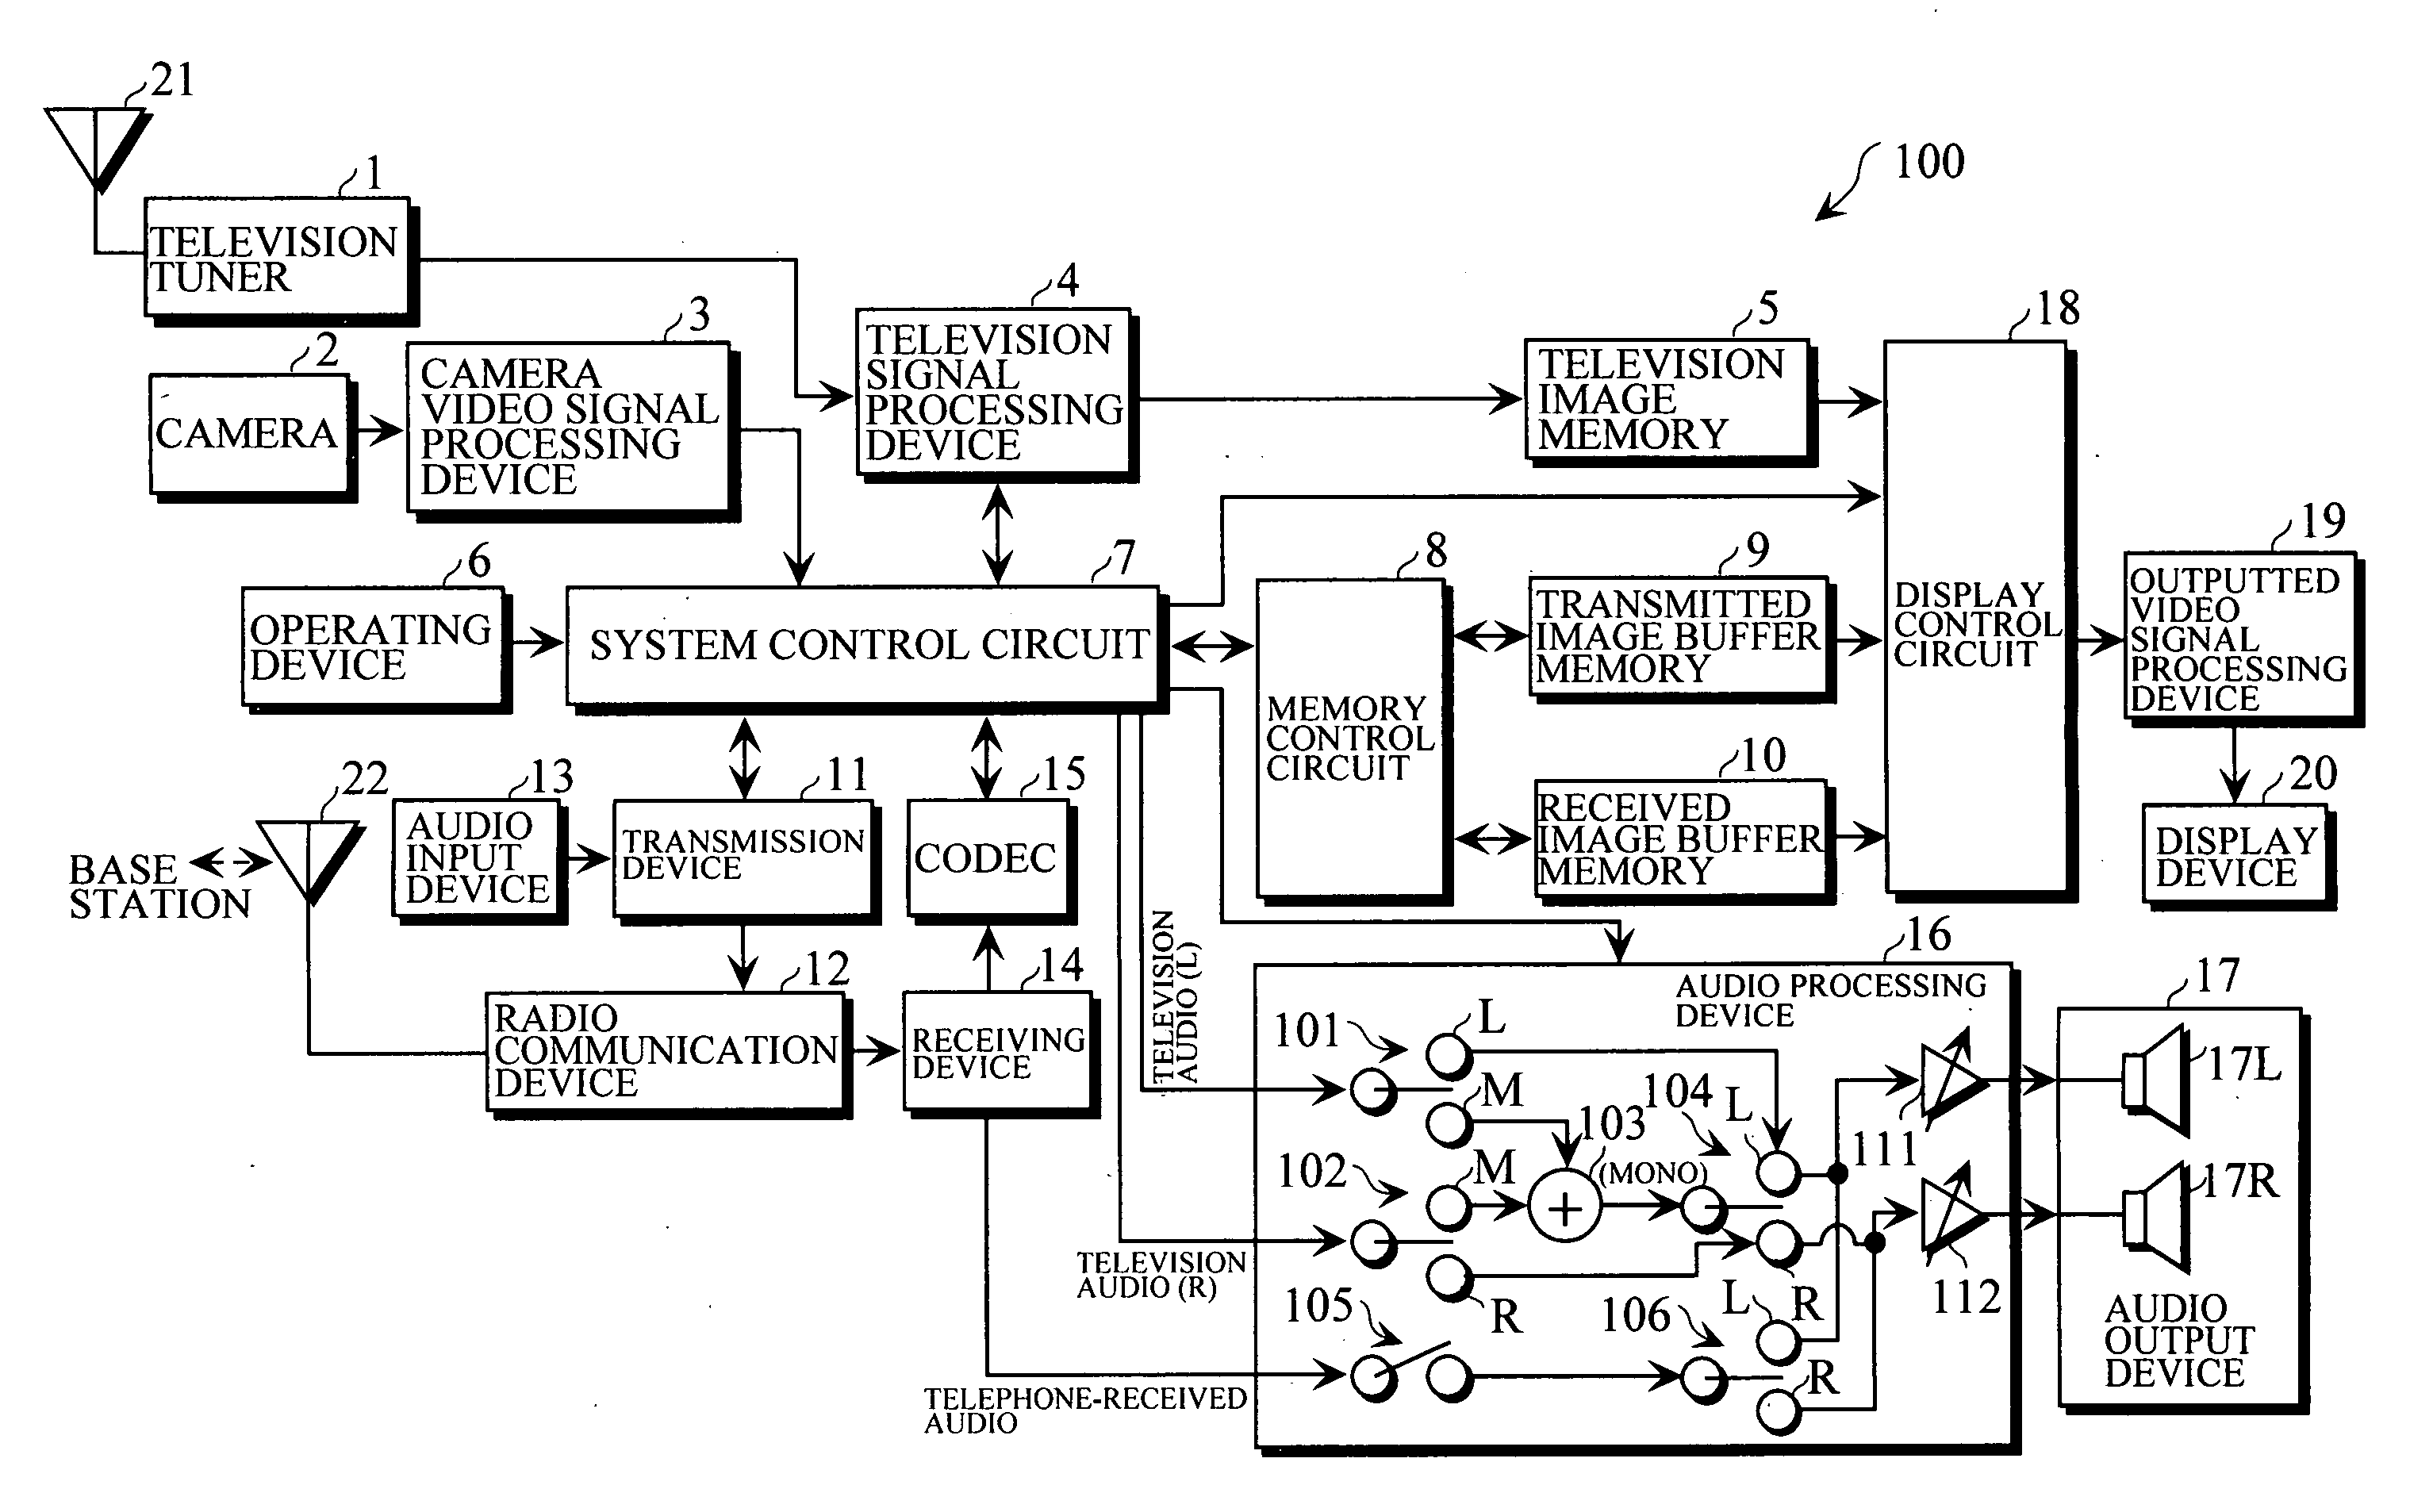 Mobile device having broadcast receiving function and telephone communication function